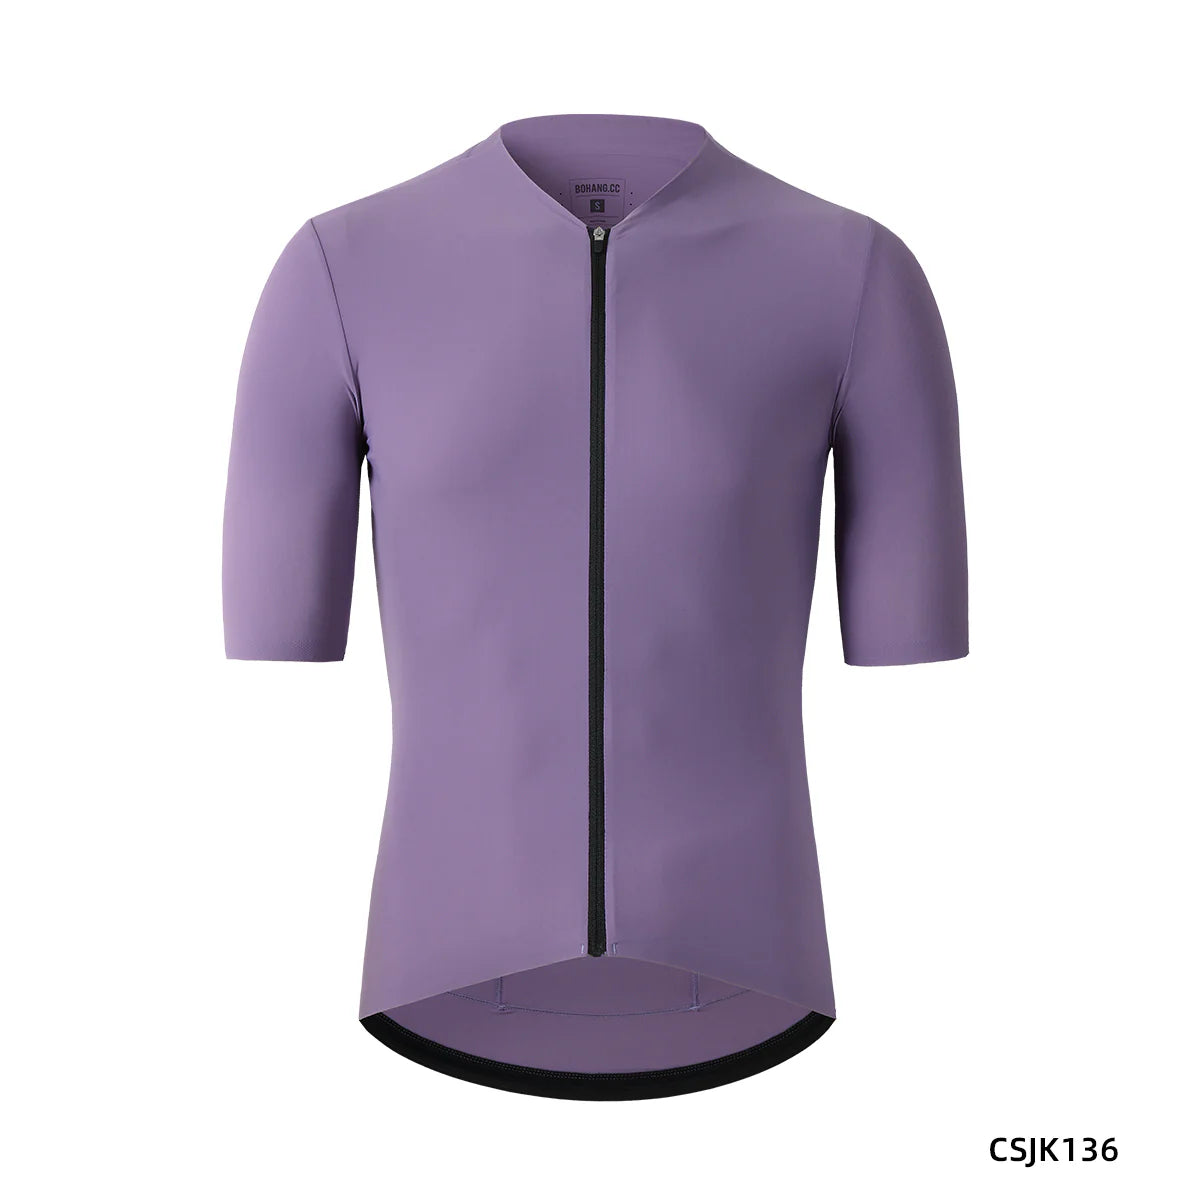 Look no further than the Men's Cycling Short Sleeve Jersey CSJK136